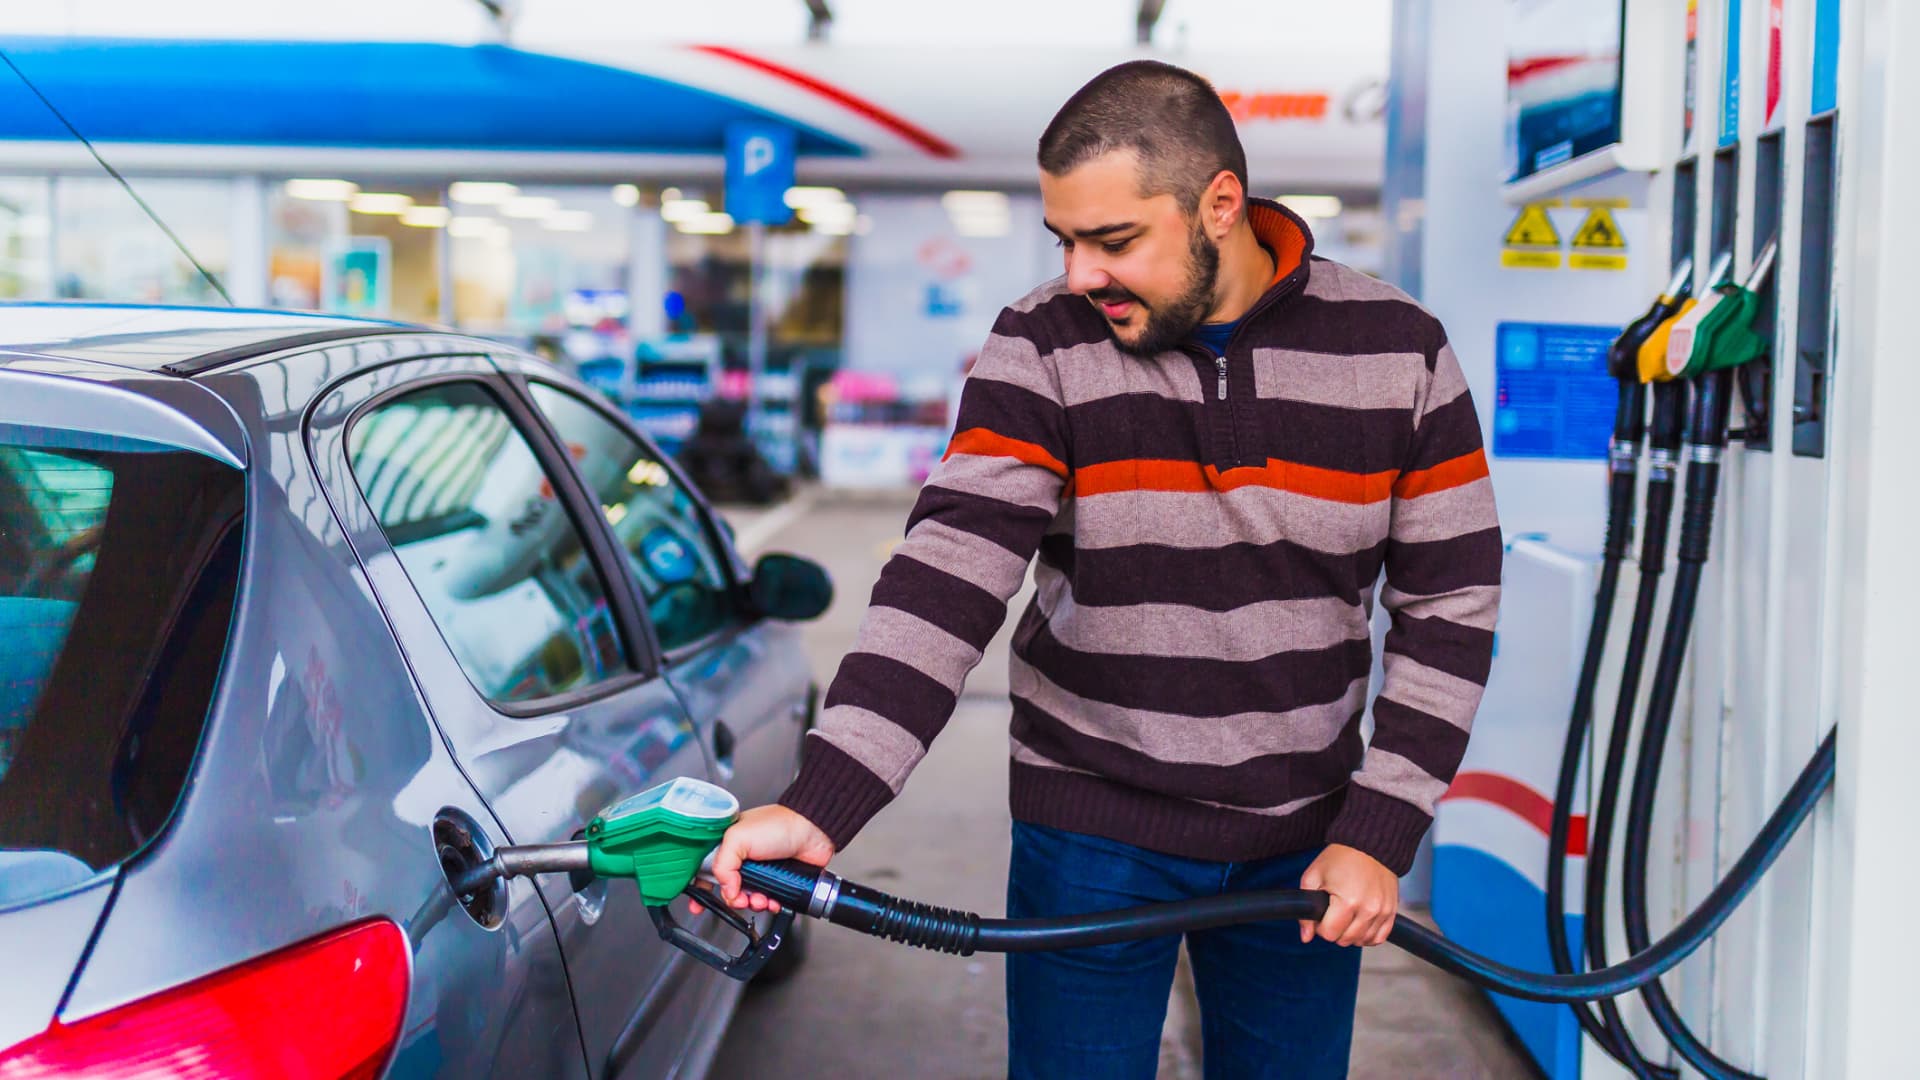 Inflation continues to rise—and gas prices are up nearly 50% since last year